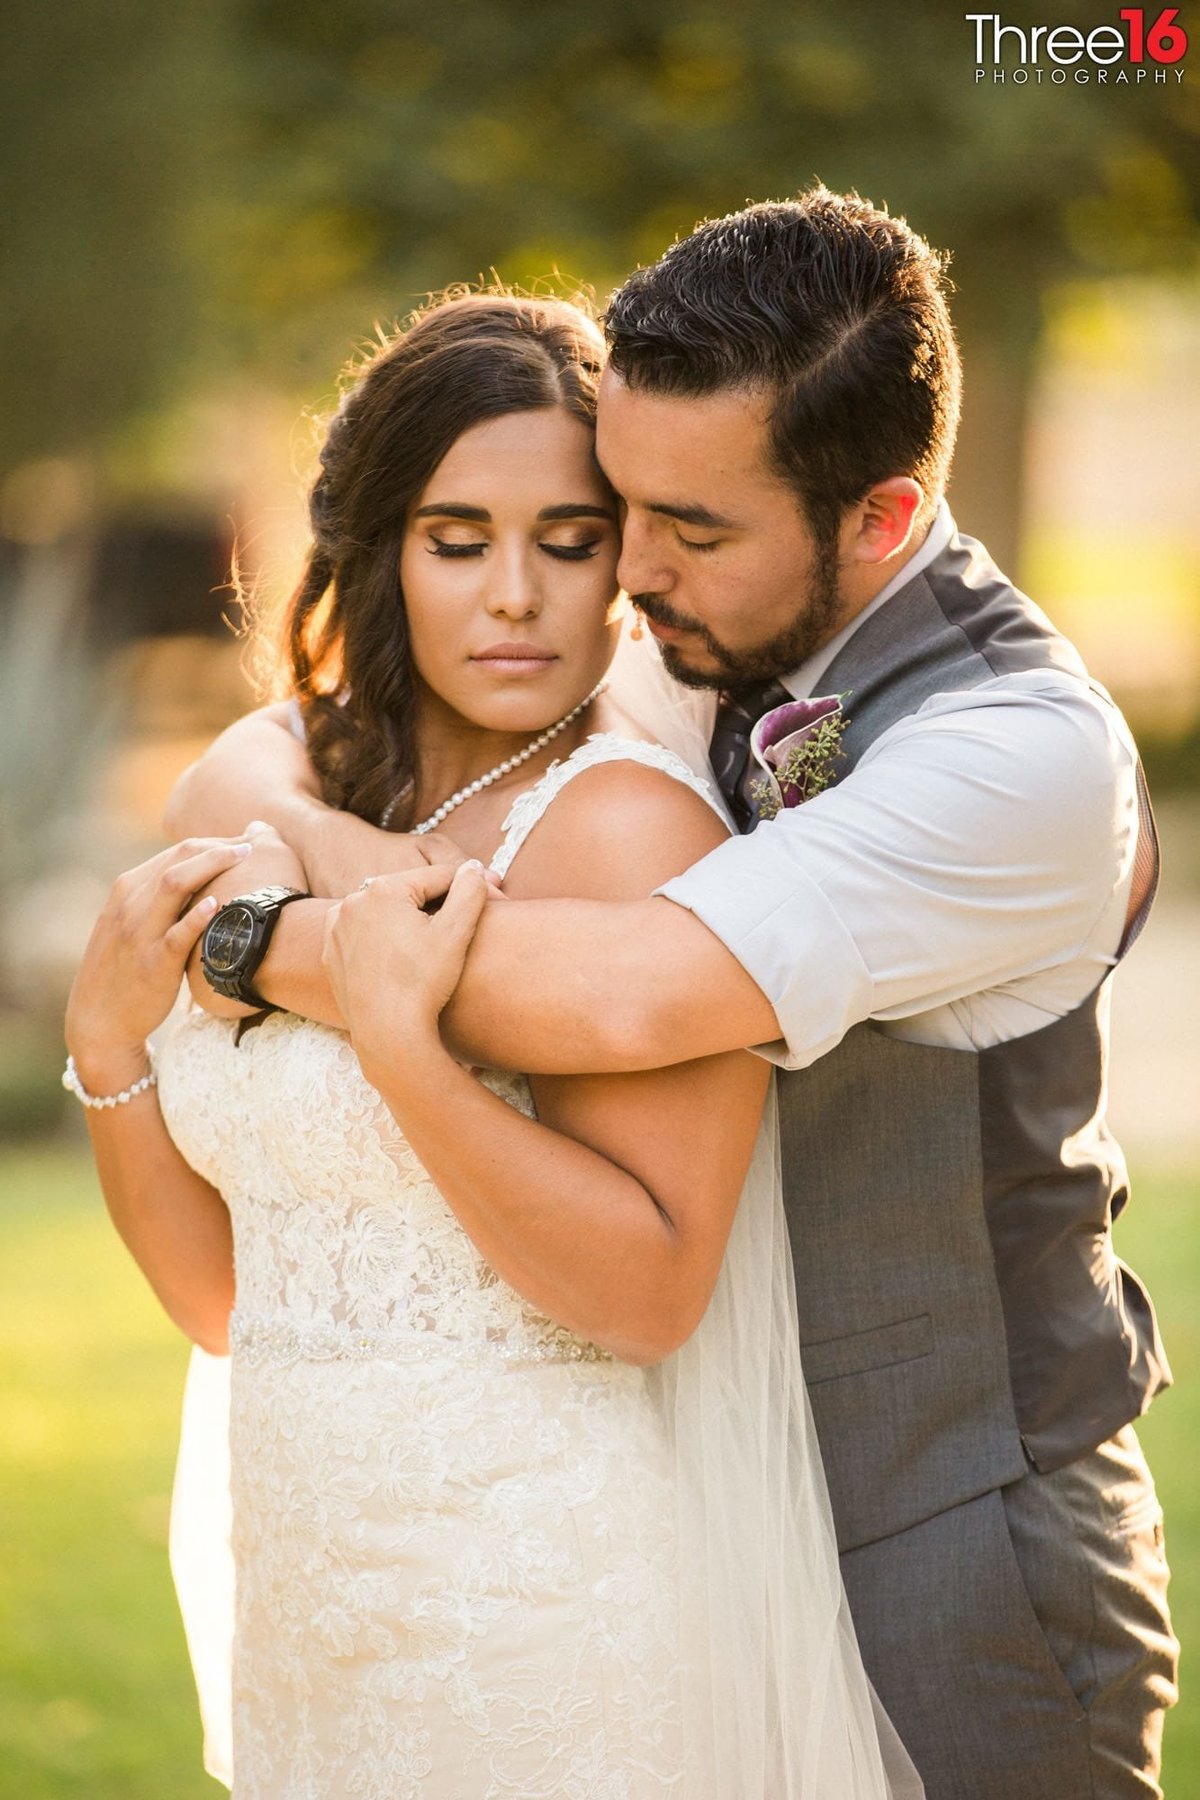 Tender moment as the Bride is fully embraced from behind by her Groom during after wedding photo session